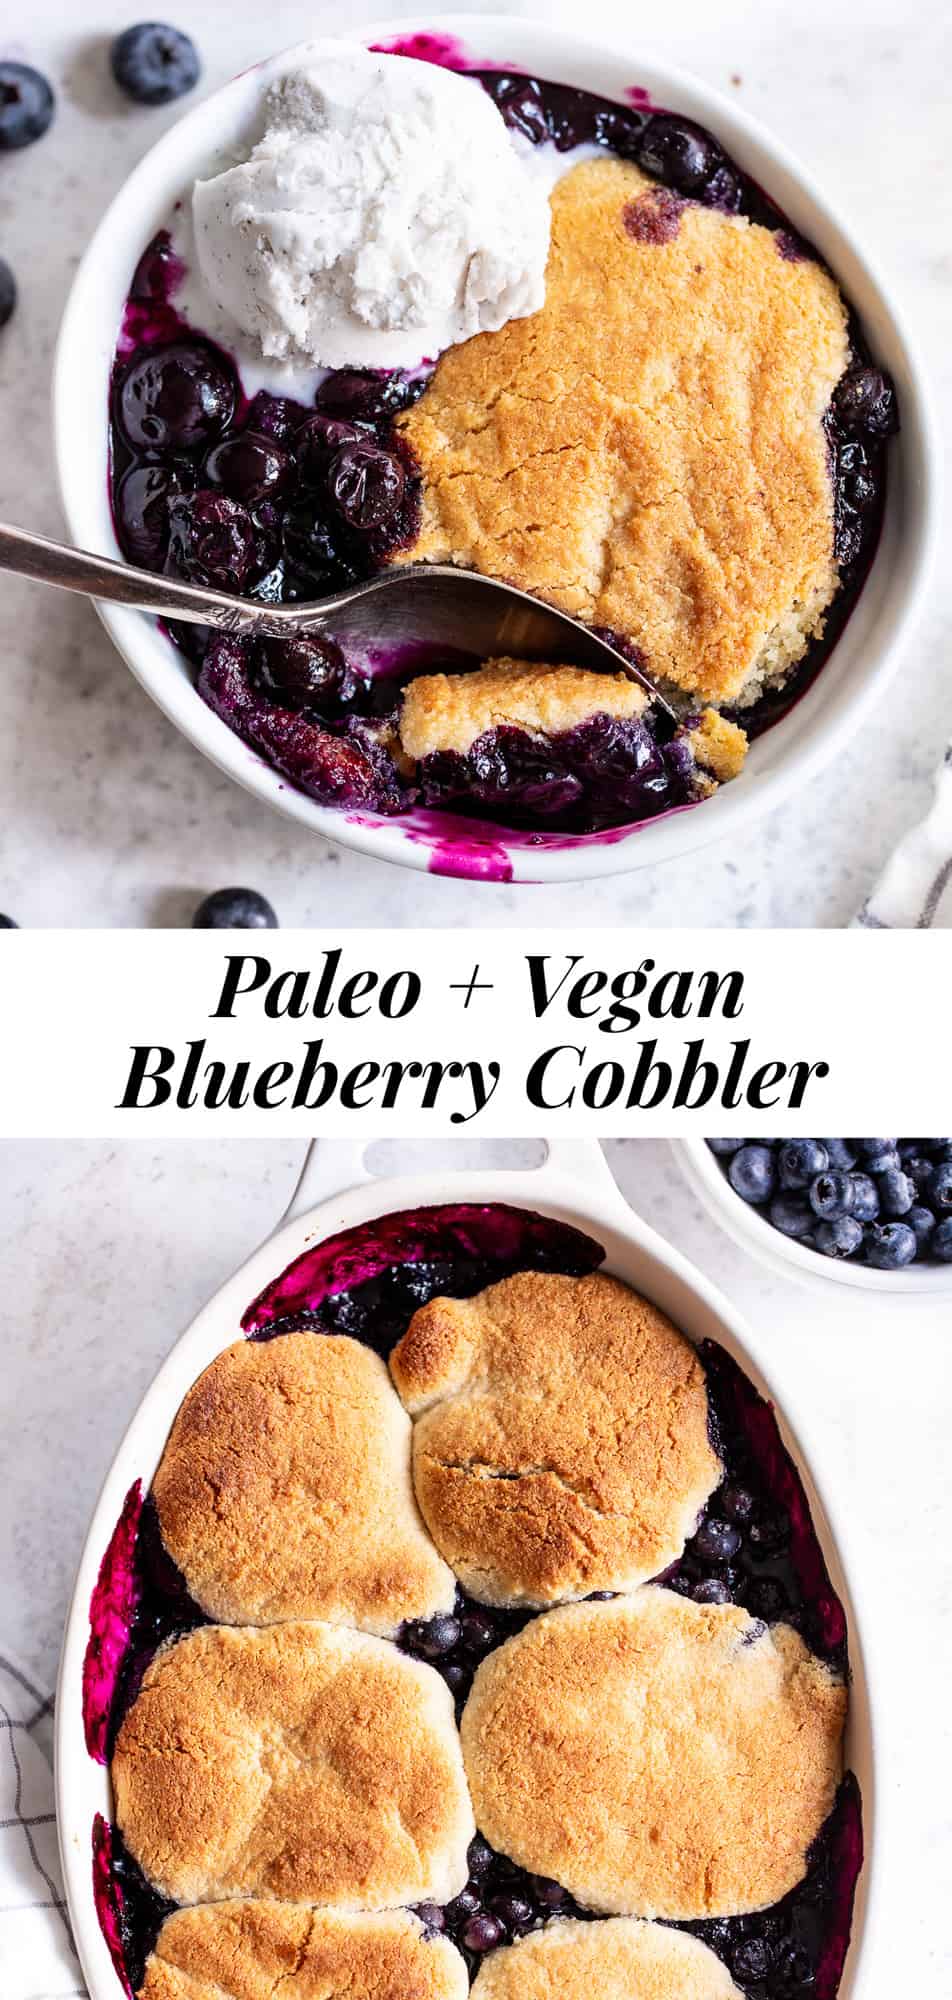 This paleo and vegan blueberry cobbler has quickly become a family favorite!  A sweet gooey blueberry layer is baked with a biscuit cobbler topping that’s gluten free, dairy free, and egg free.  It’s perfect served with a big scoop of coconut vanilla ice cream or on its own!  Easy to make and the perfect healthy dessert for Spring and Summer. #paleo #vegan #cobbler #glutenfree #paleobaking #cleaneating #glutenfreedessert